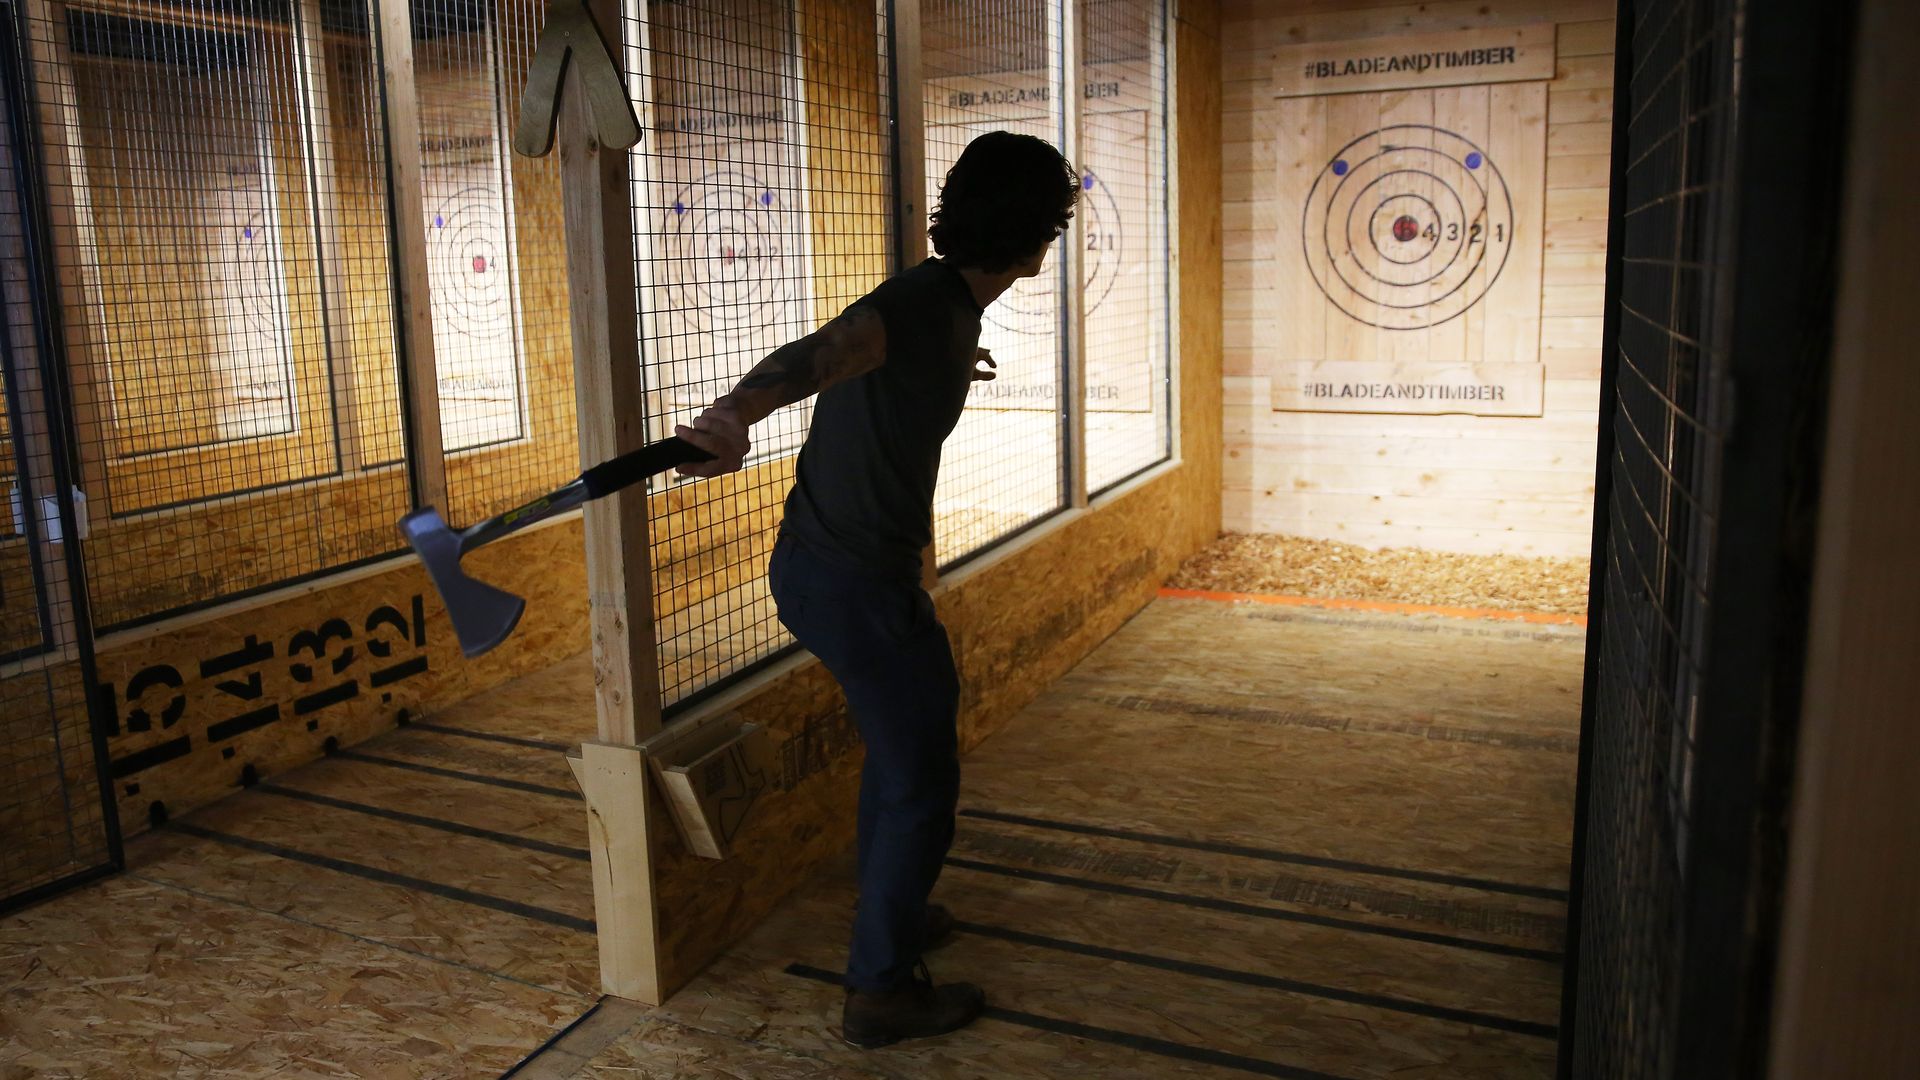 A person in silhouette preparing to throw an axe, in a lane closed in by wood and wire, with a wooden target in the distance.